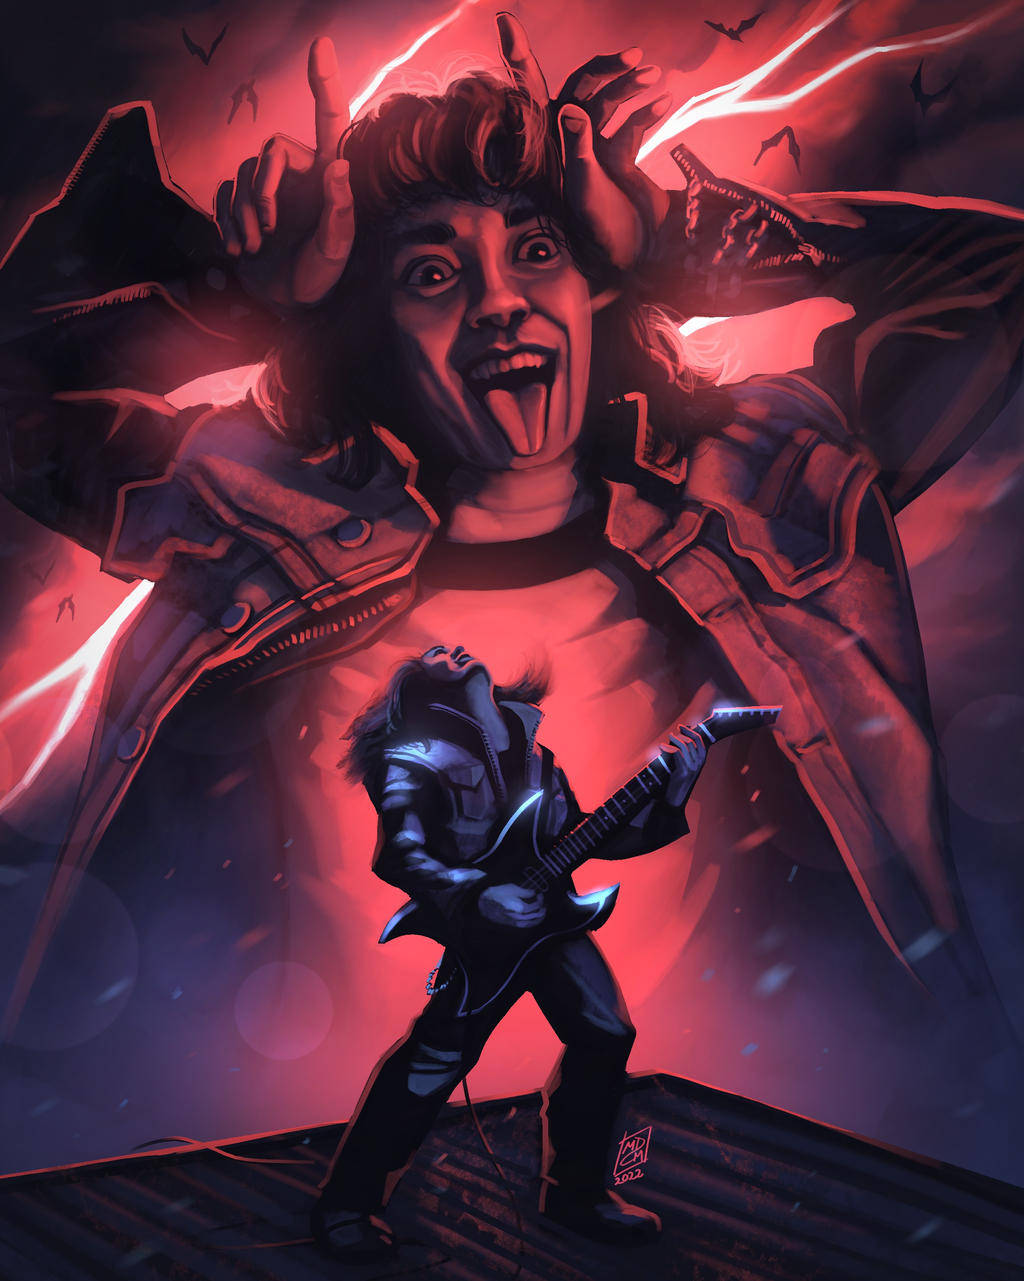 Painted Eddie Munson the guitar hero This scene gave me so much chills  and feels  rStrangerThings